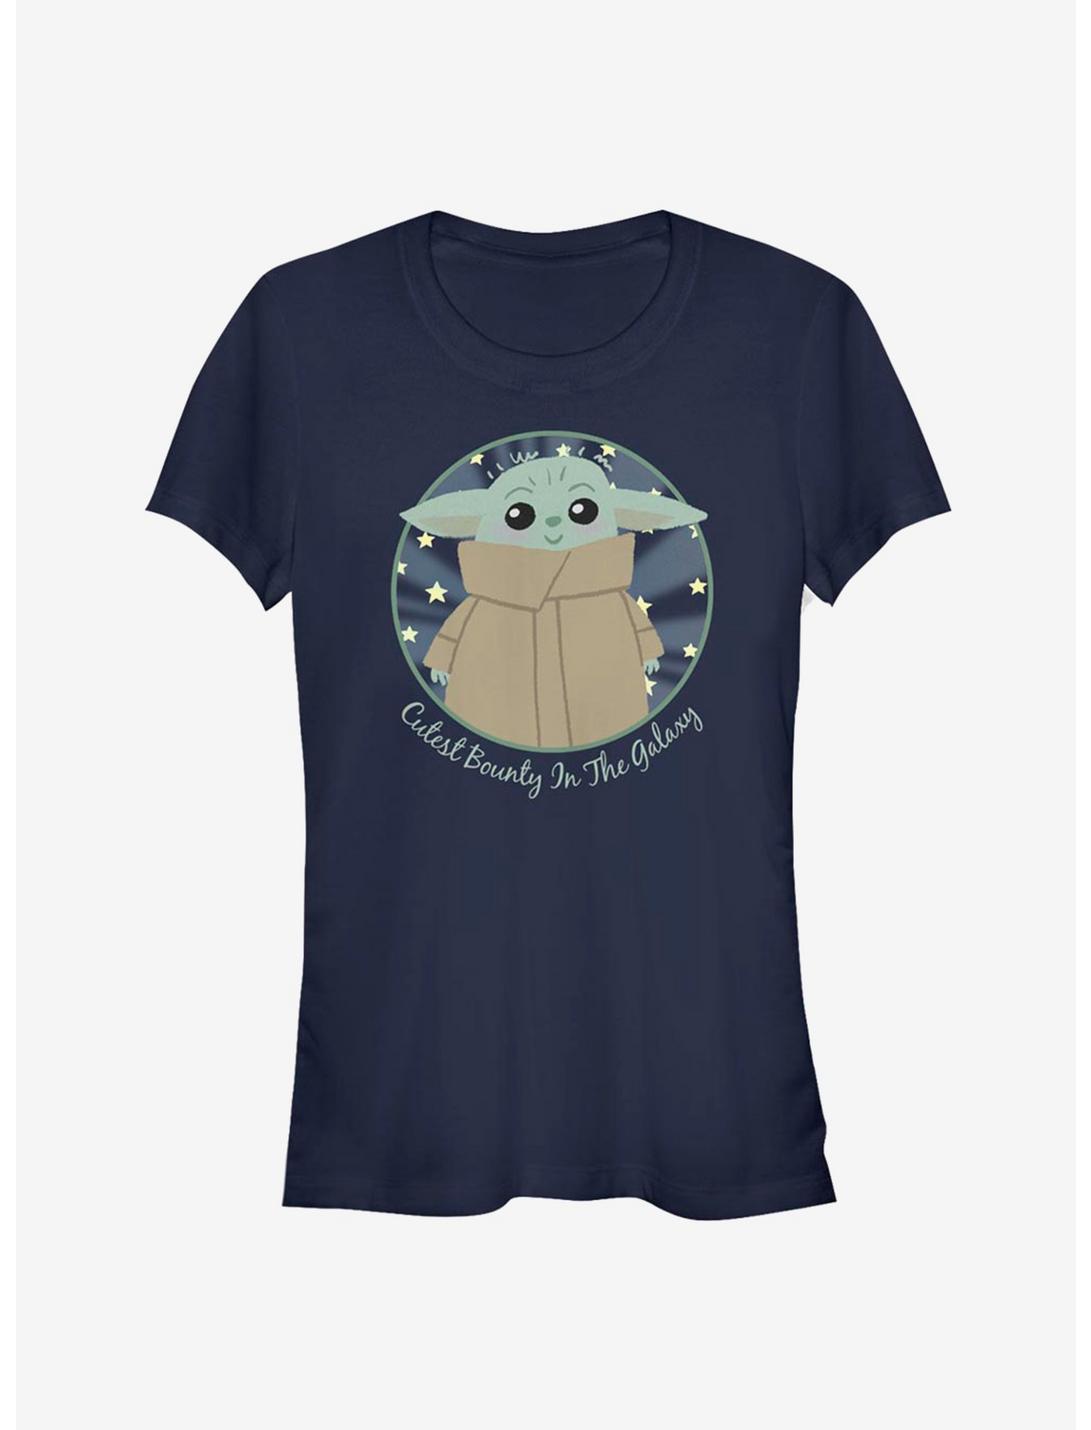 Star Wars The Mandalorian The Child Cutest Bounty In The Galaxy Girls T-Shirt, NAVY, hi-res